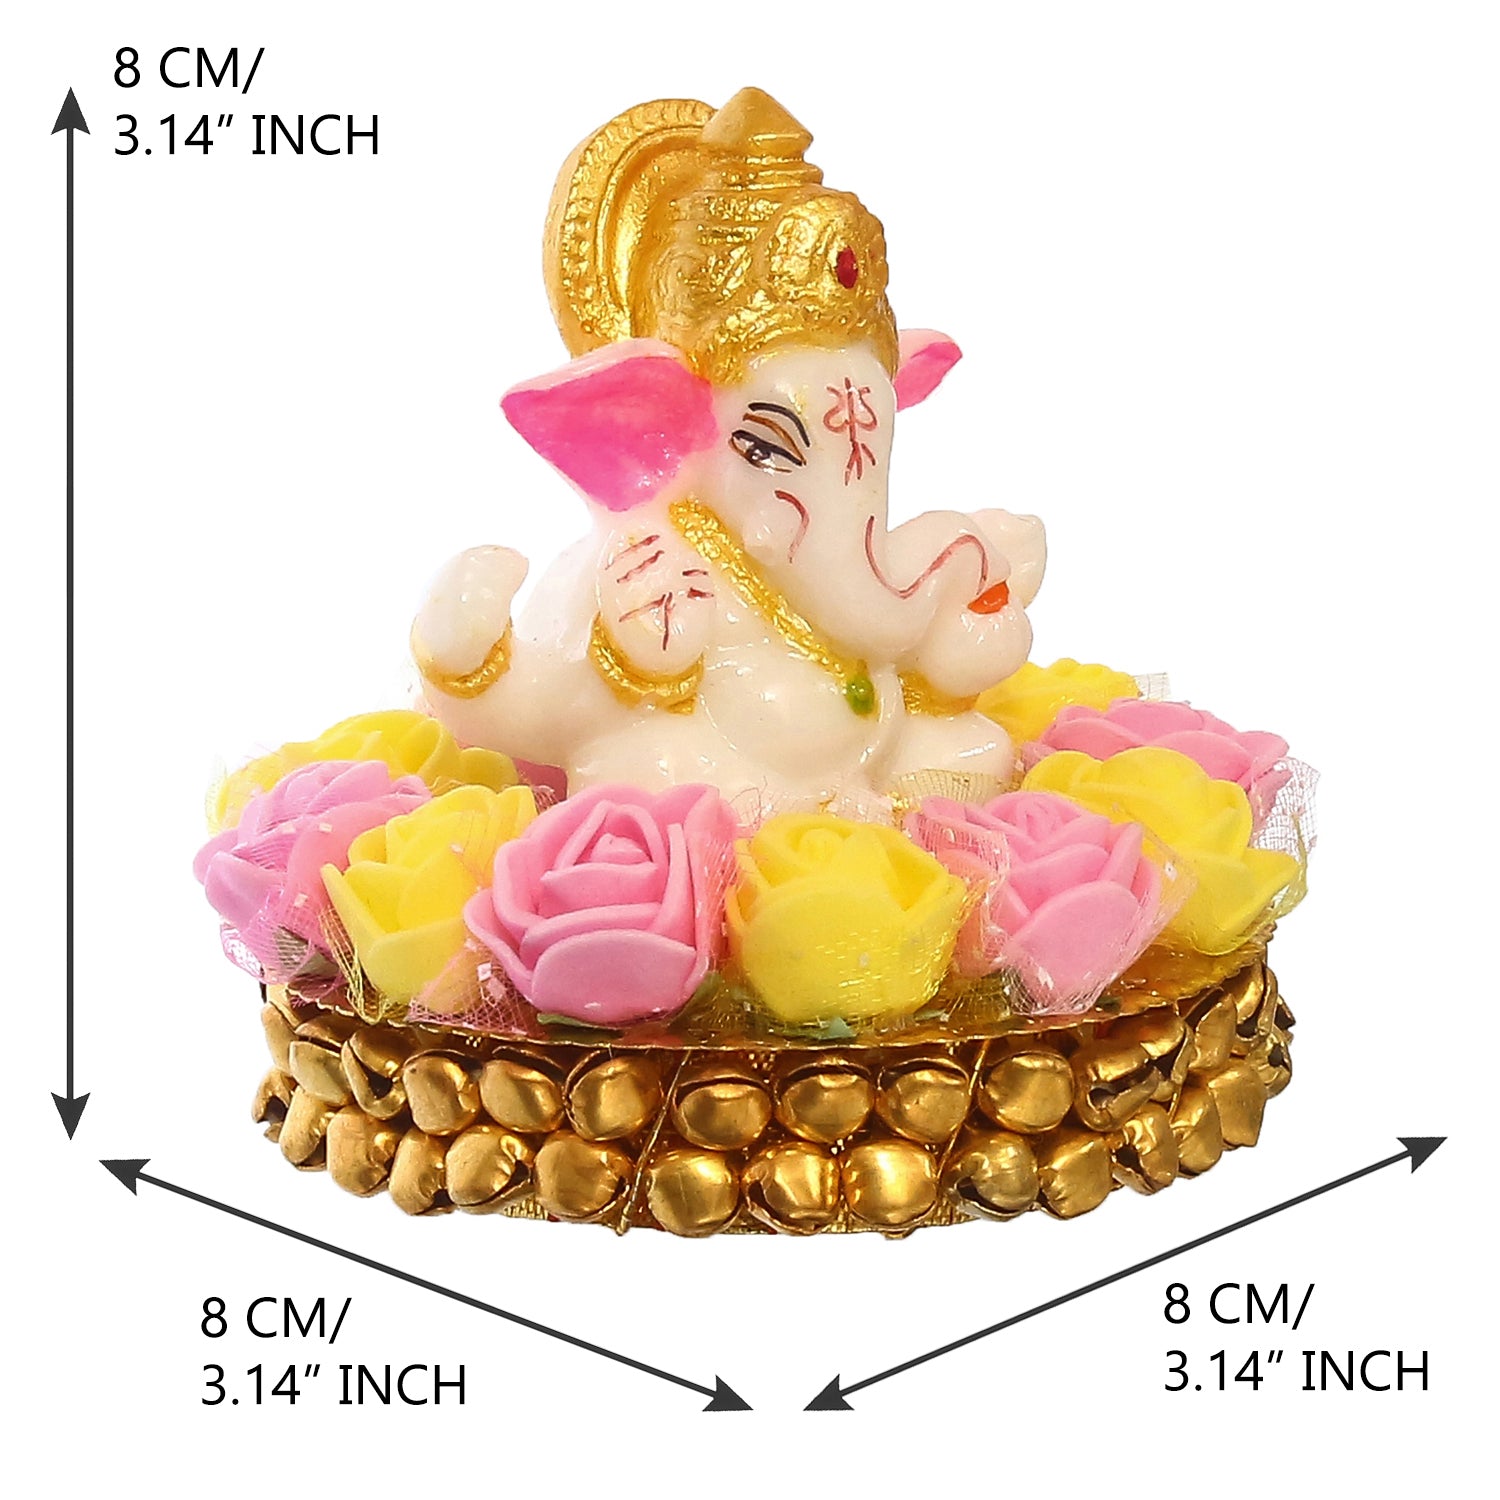 Golden and White Polyresin Lord Ganesha Idol on Decorative Handcrafted Plate with Pink and Yellow Flowers 3